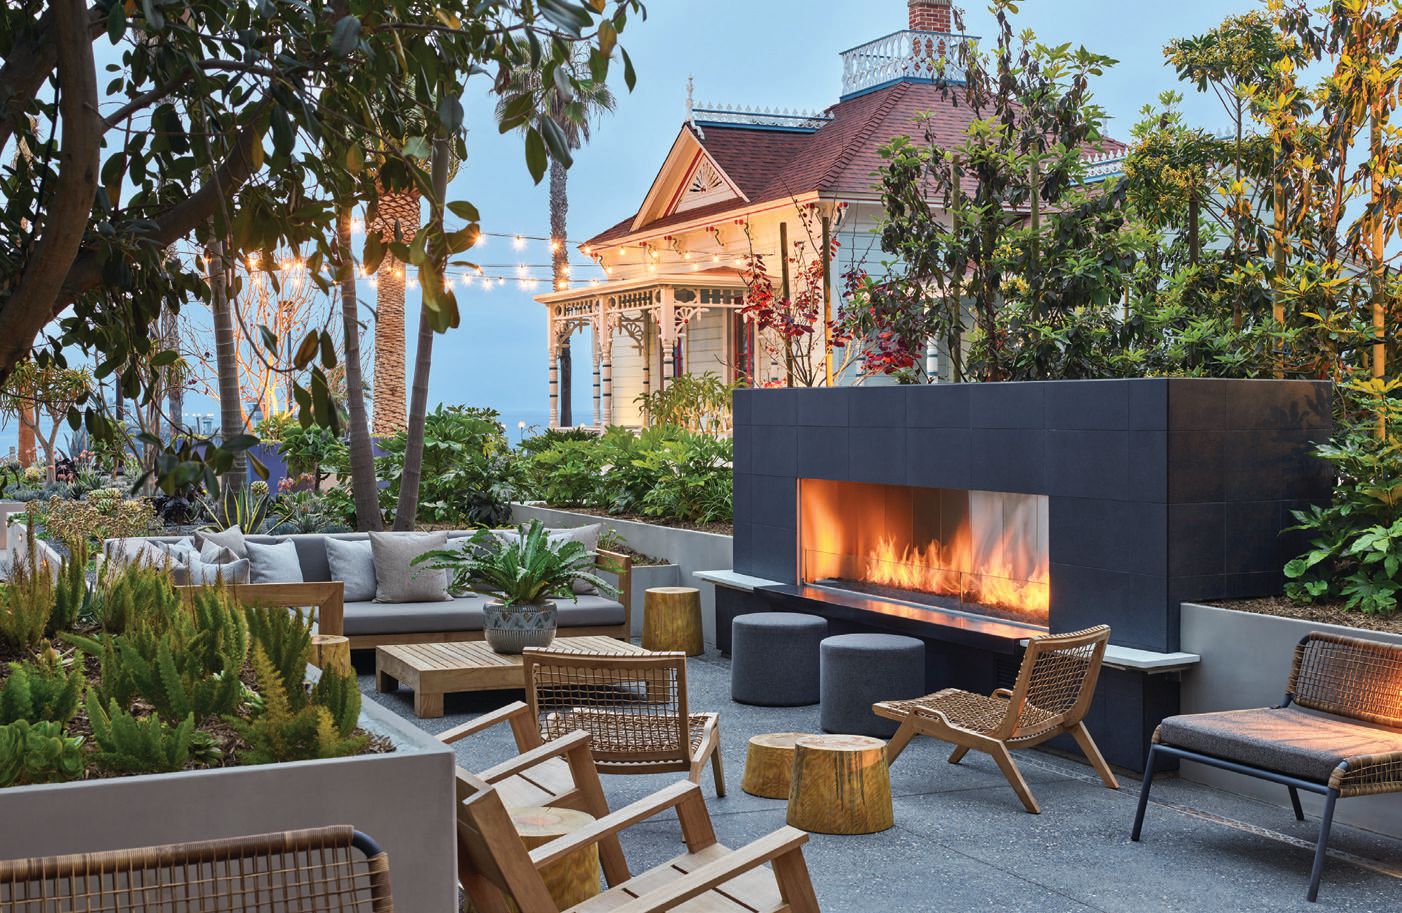 Relax in Mission Pacific Hotel’s courtyard, complete with a fireplace PHOTO: COURTESY OF MISSION PACIFIC HOTEL